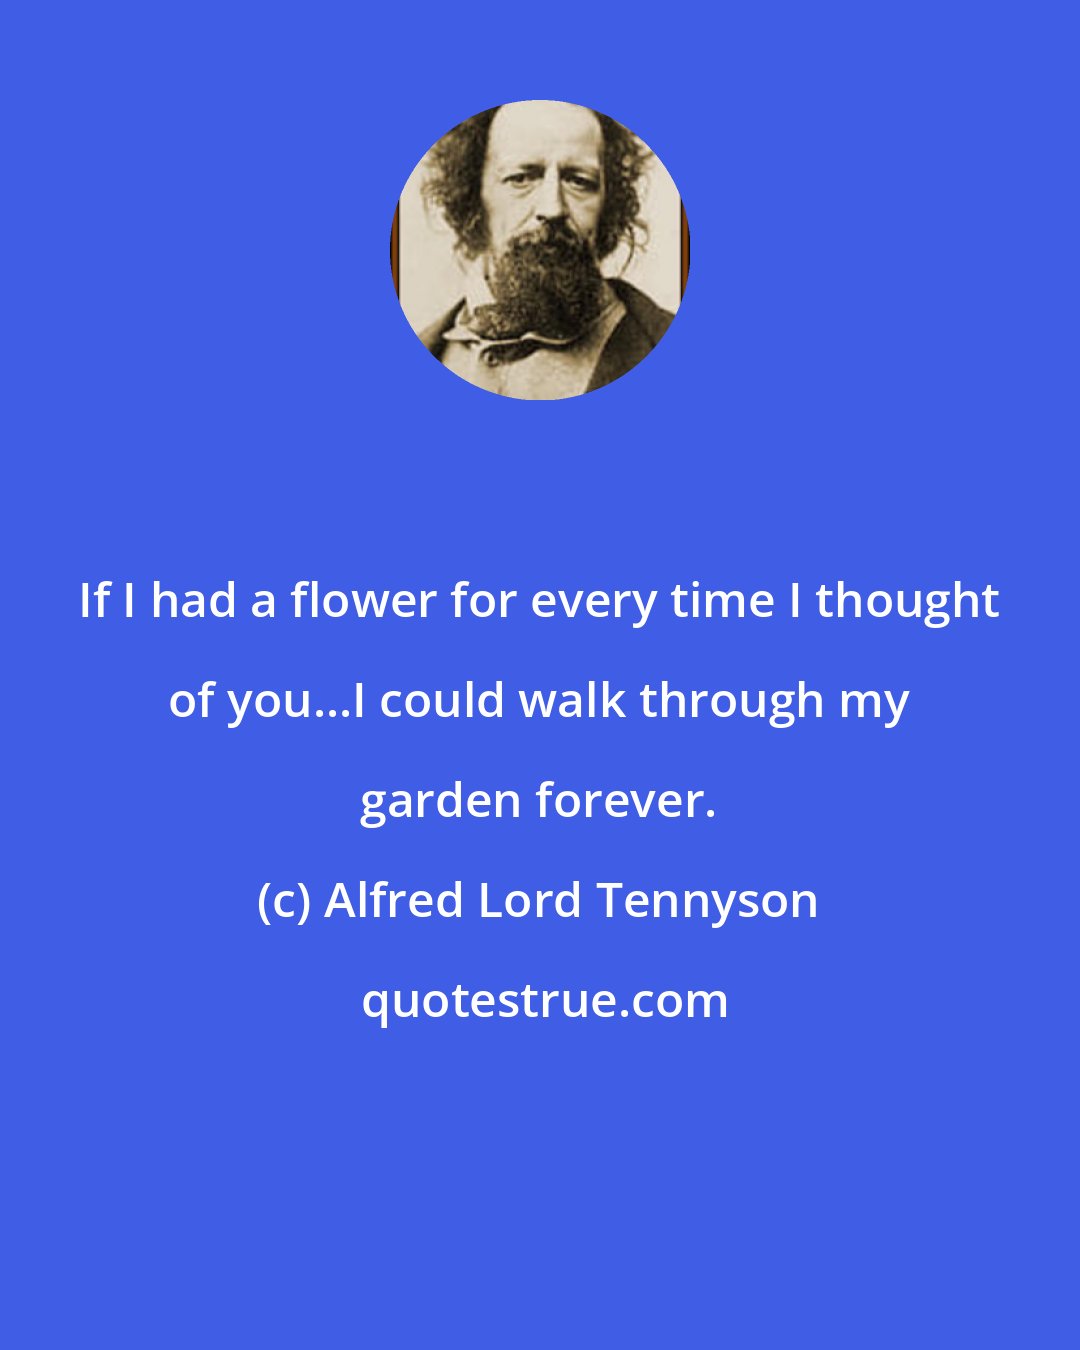 Alfred Lord Tennyson: If I had a flower for every time I thought of you...I could walk through my garden forever.